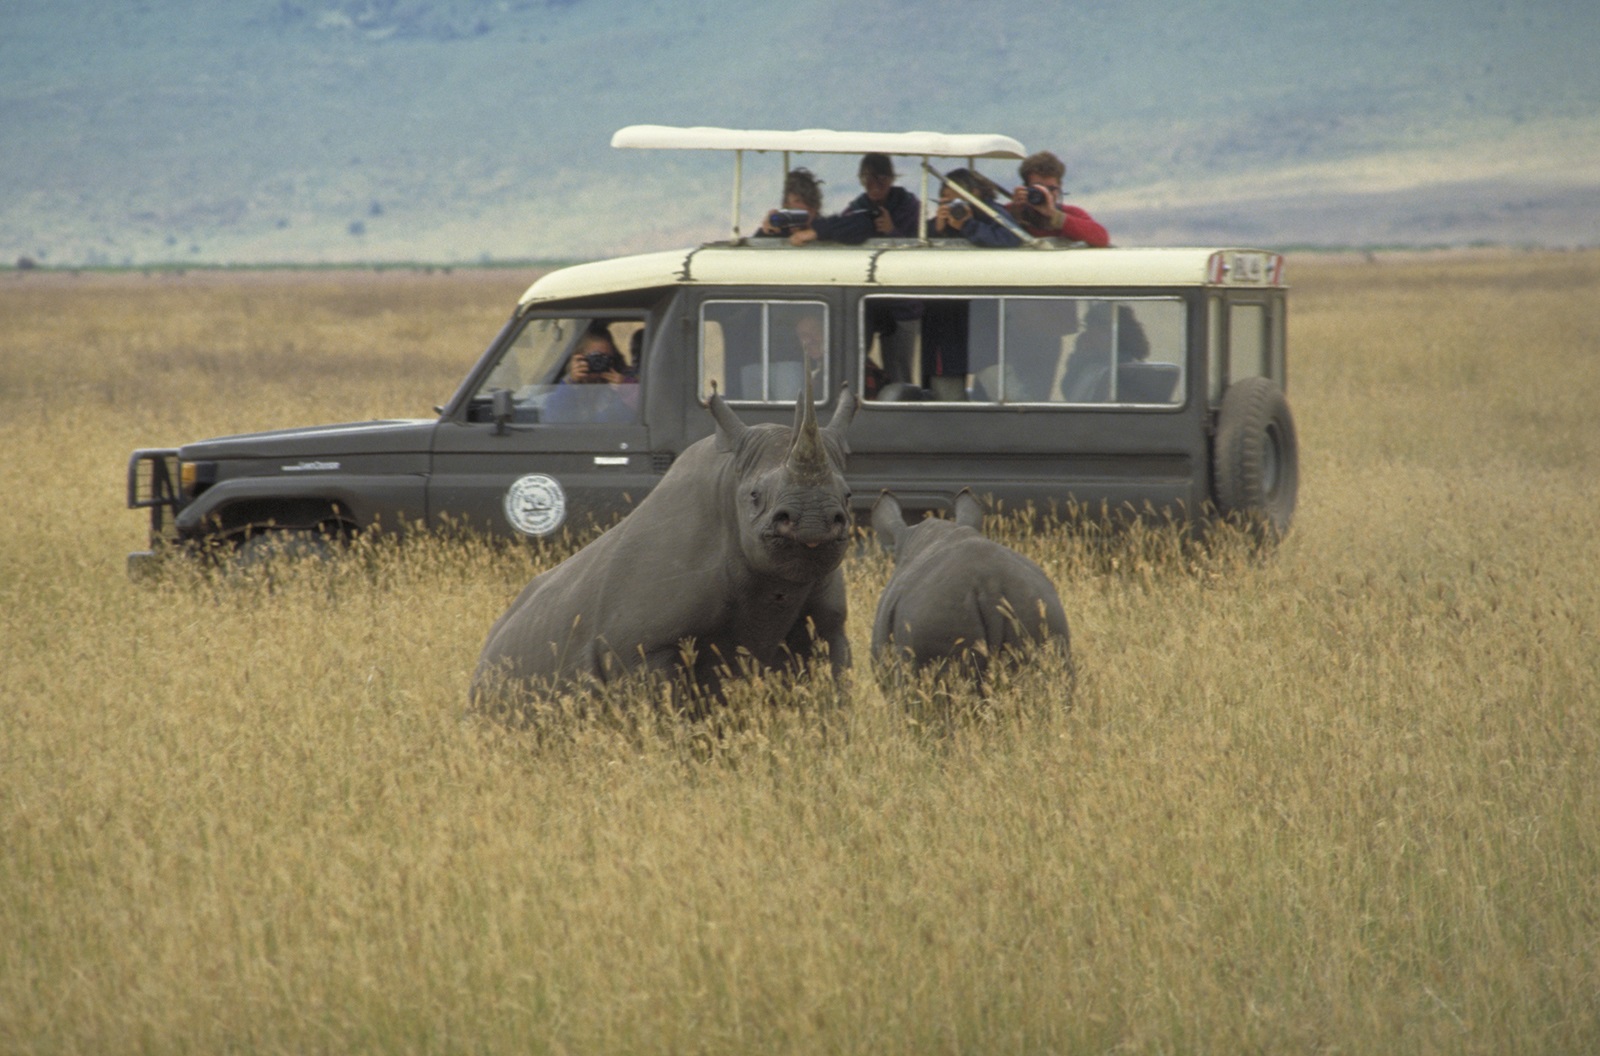 Visit Arusha offers customized Tanzania safari trips allowing the vacationer to plan their own completely personalized African safari.